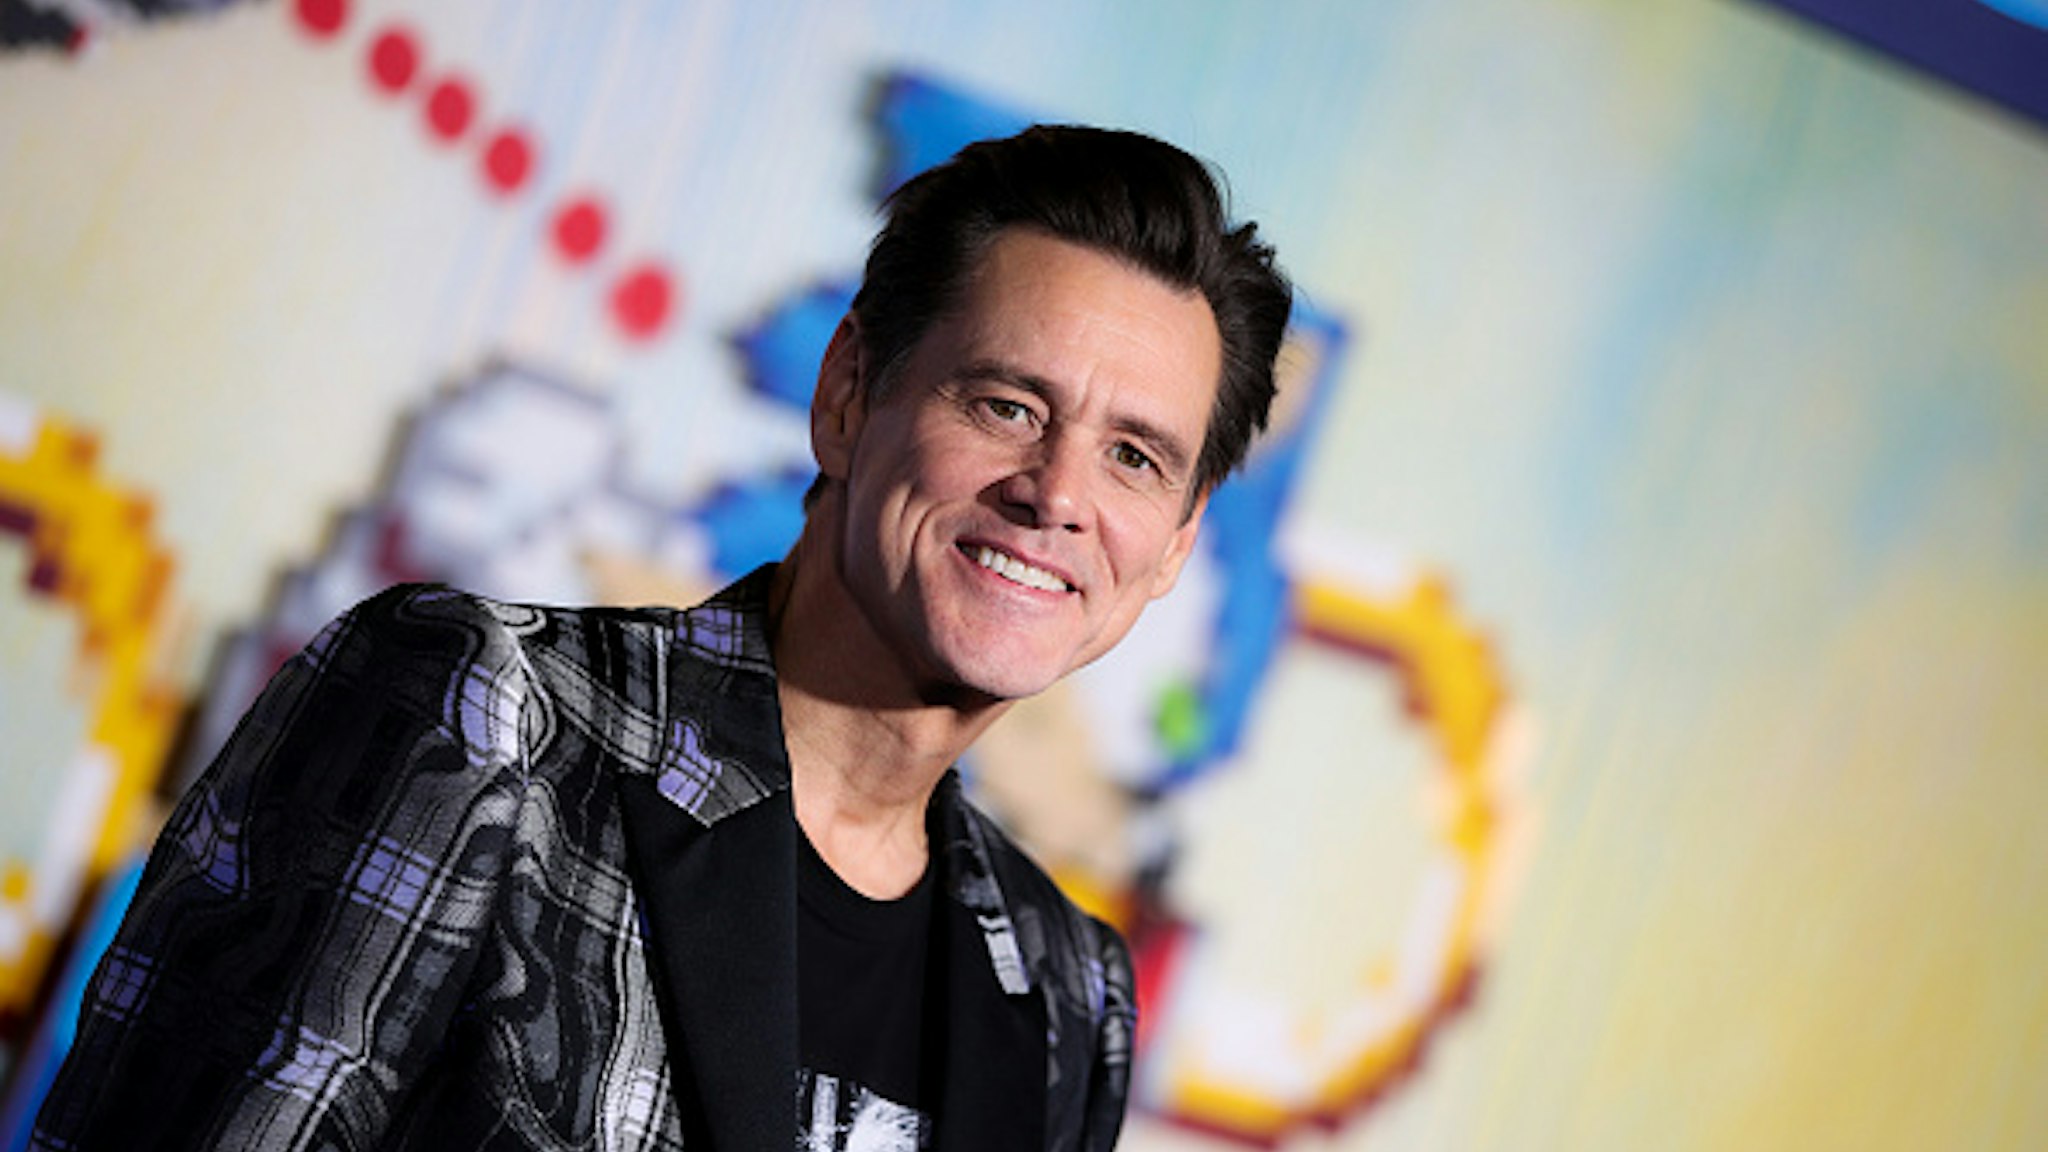 Jim Carrey attends the LA special screening of Paramount's "Sonic The Hedgehog" at Regency Village Theatre on February 12, 2020 in Westwood, California.